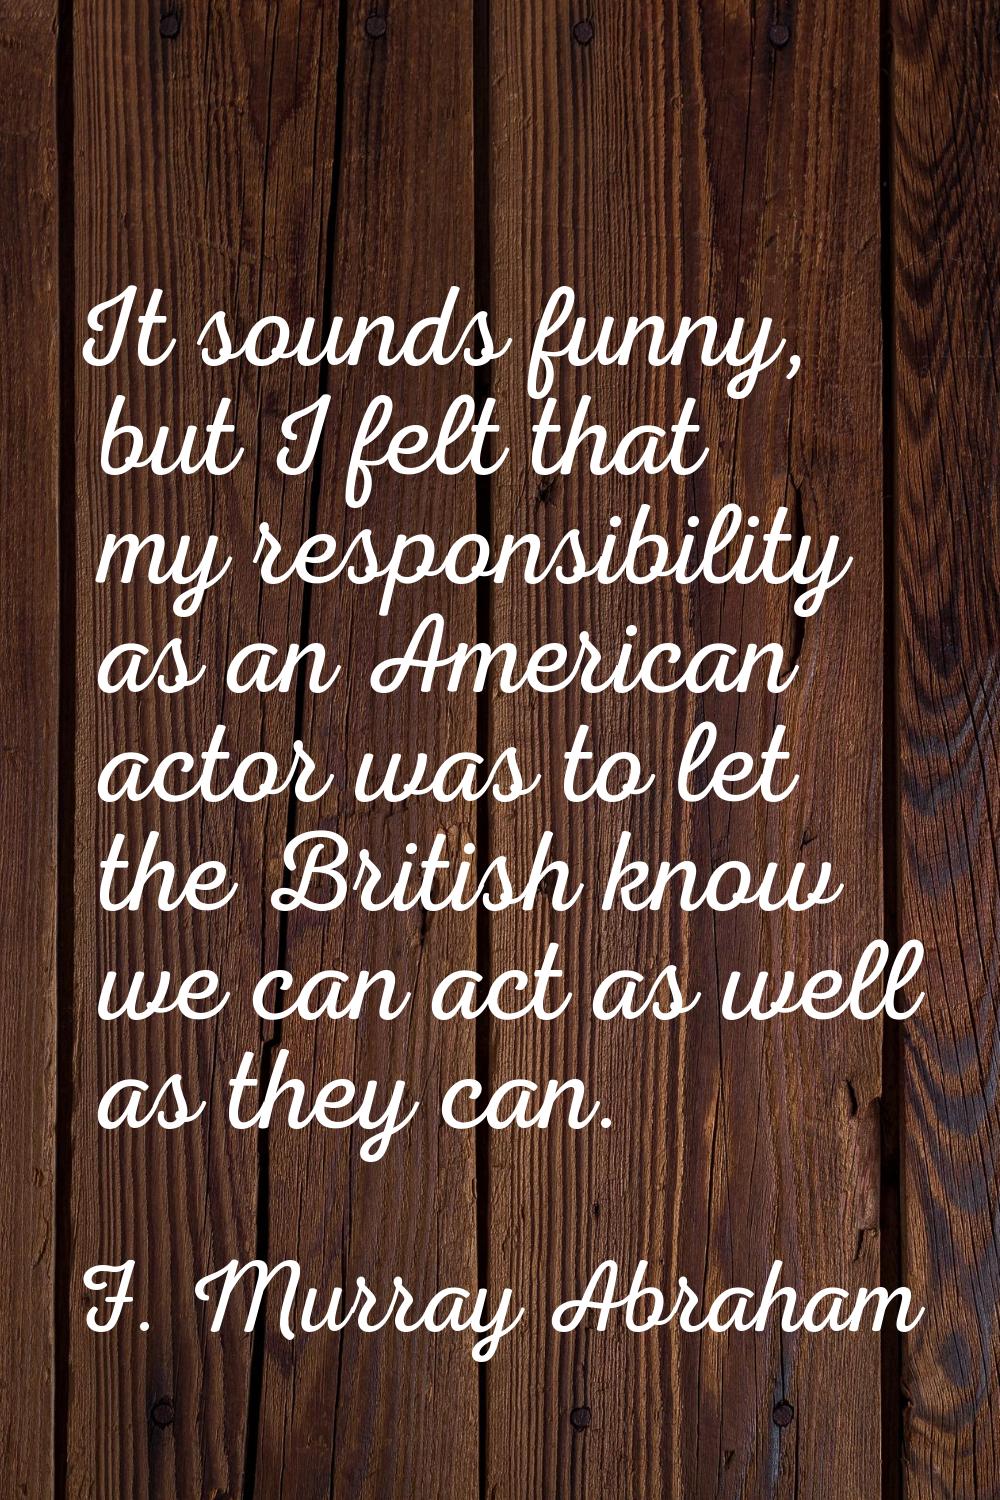 It sounds funny, but I felt that my responsibility as an American actor was to let the British know